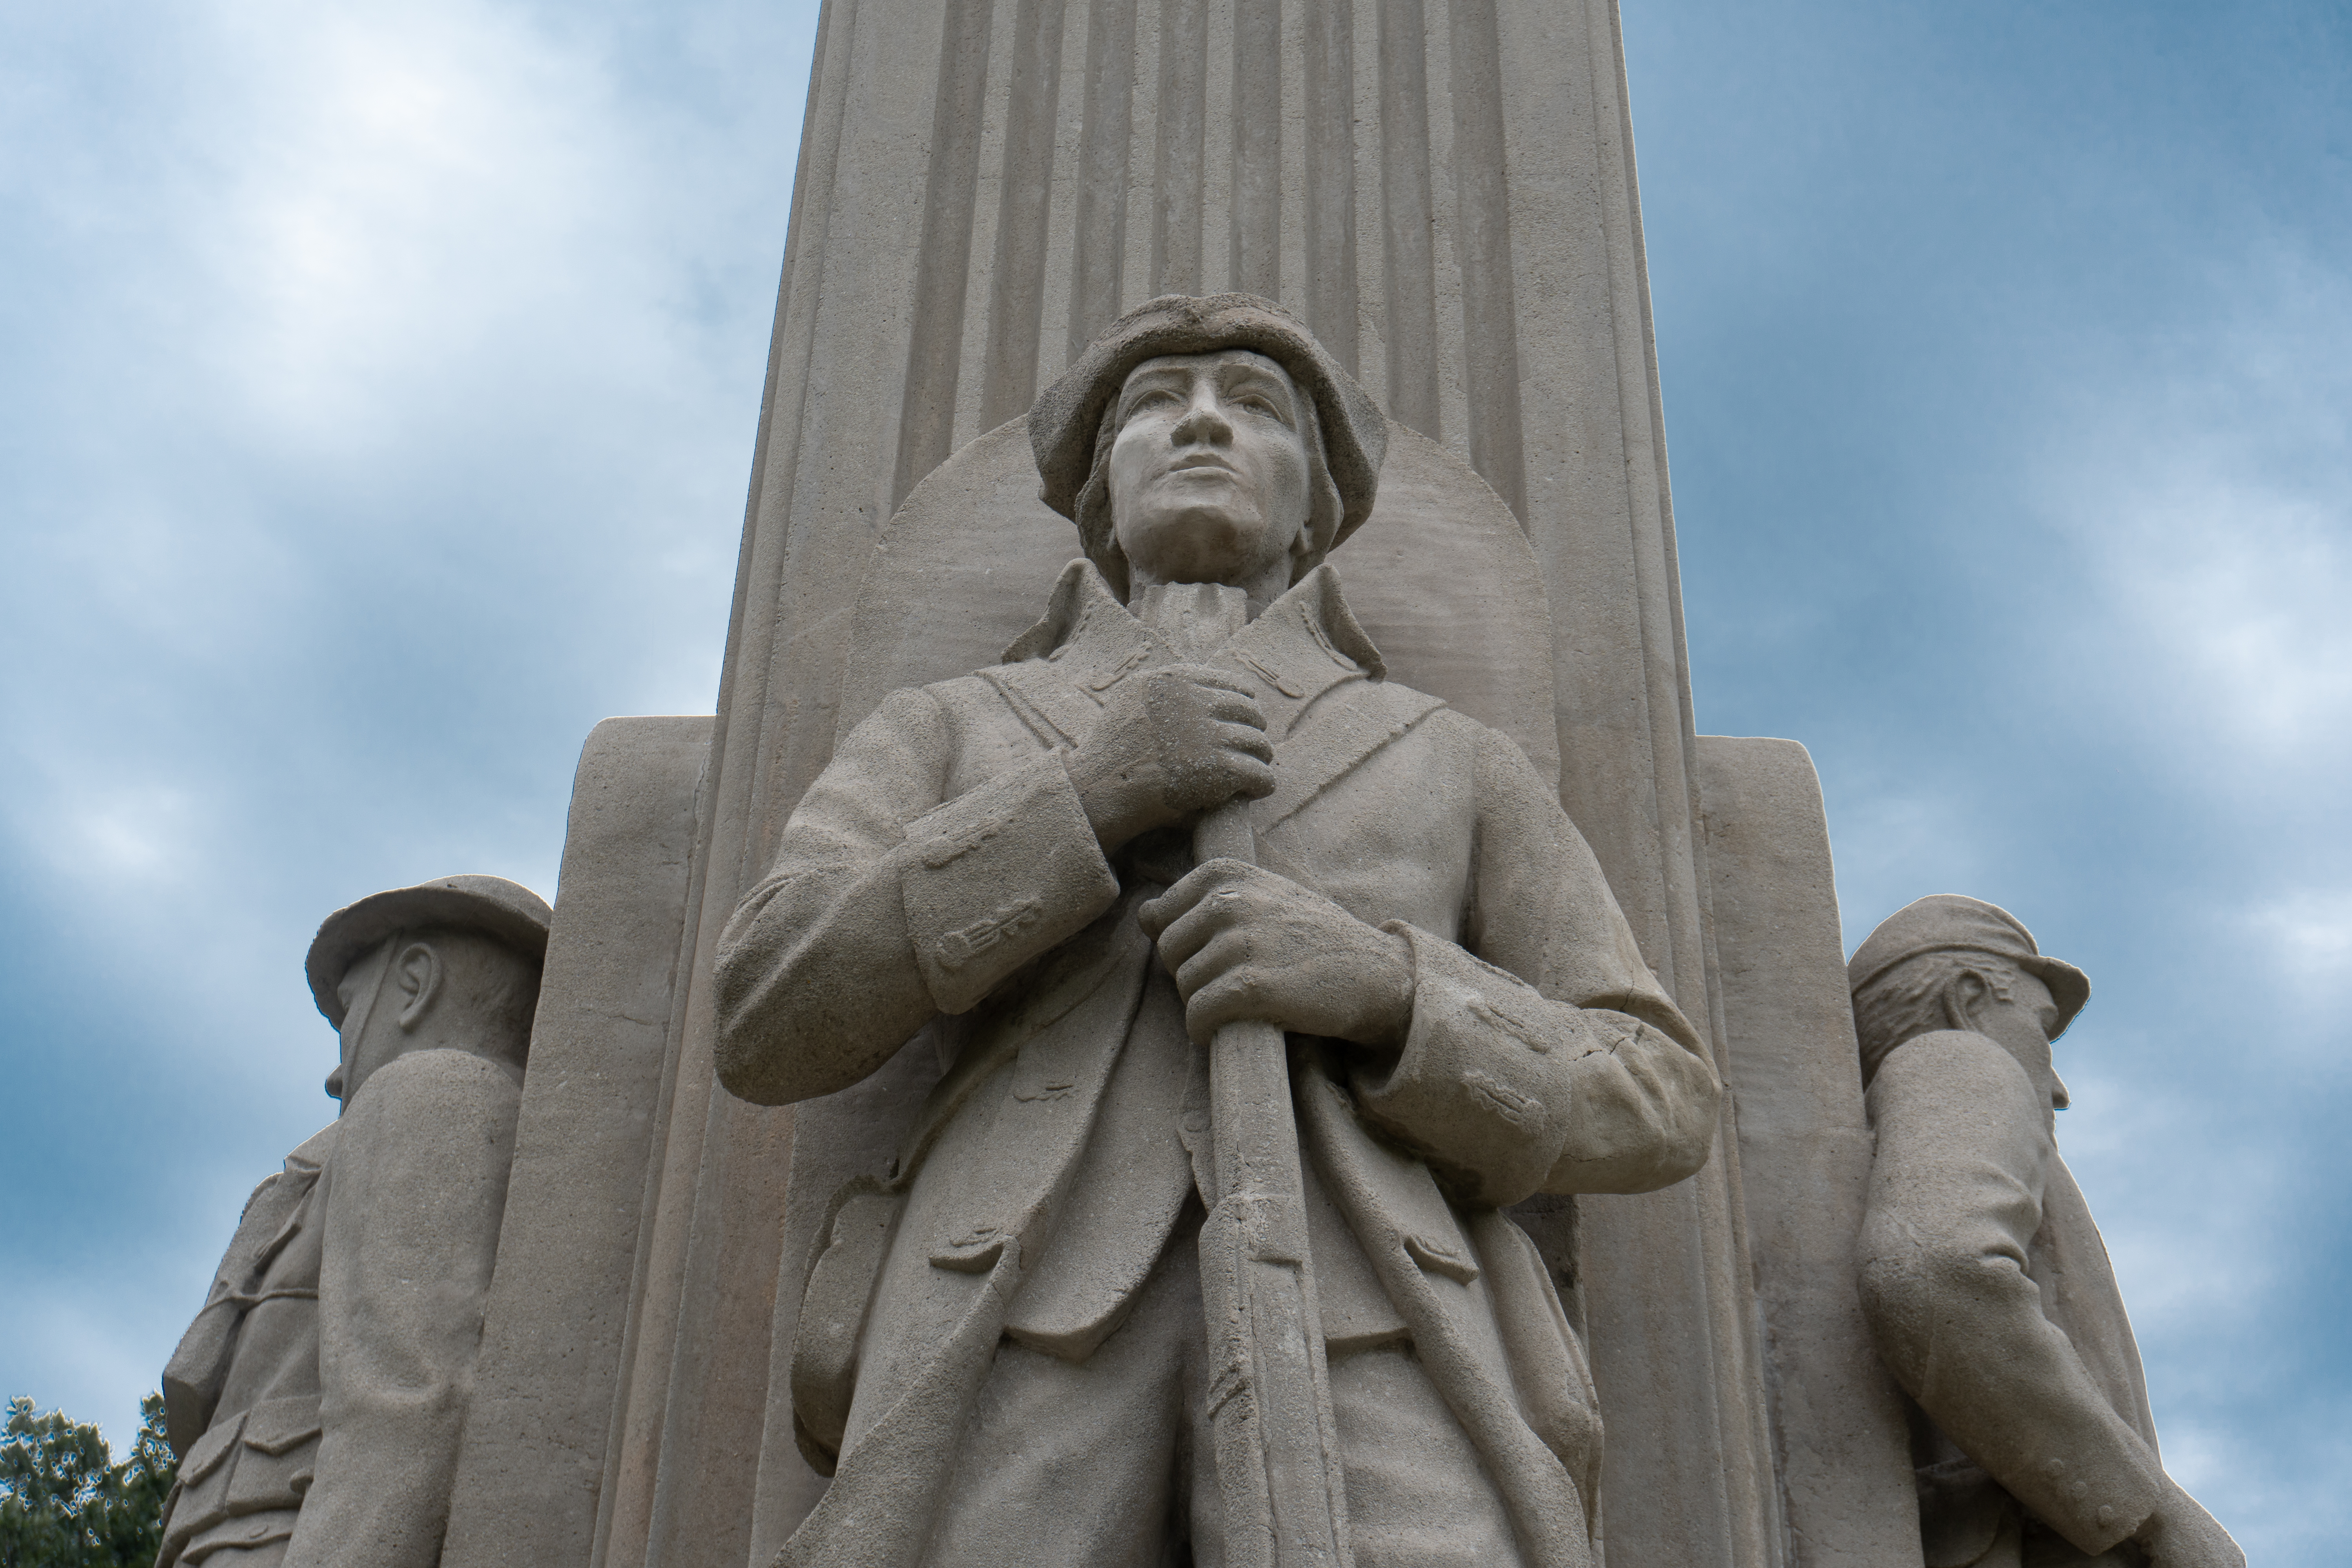 Close up of the revolutionary war figure on the War and Victory monument